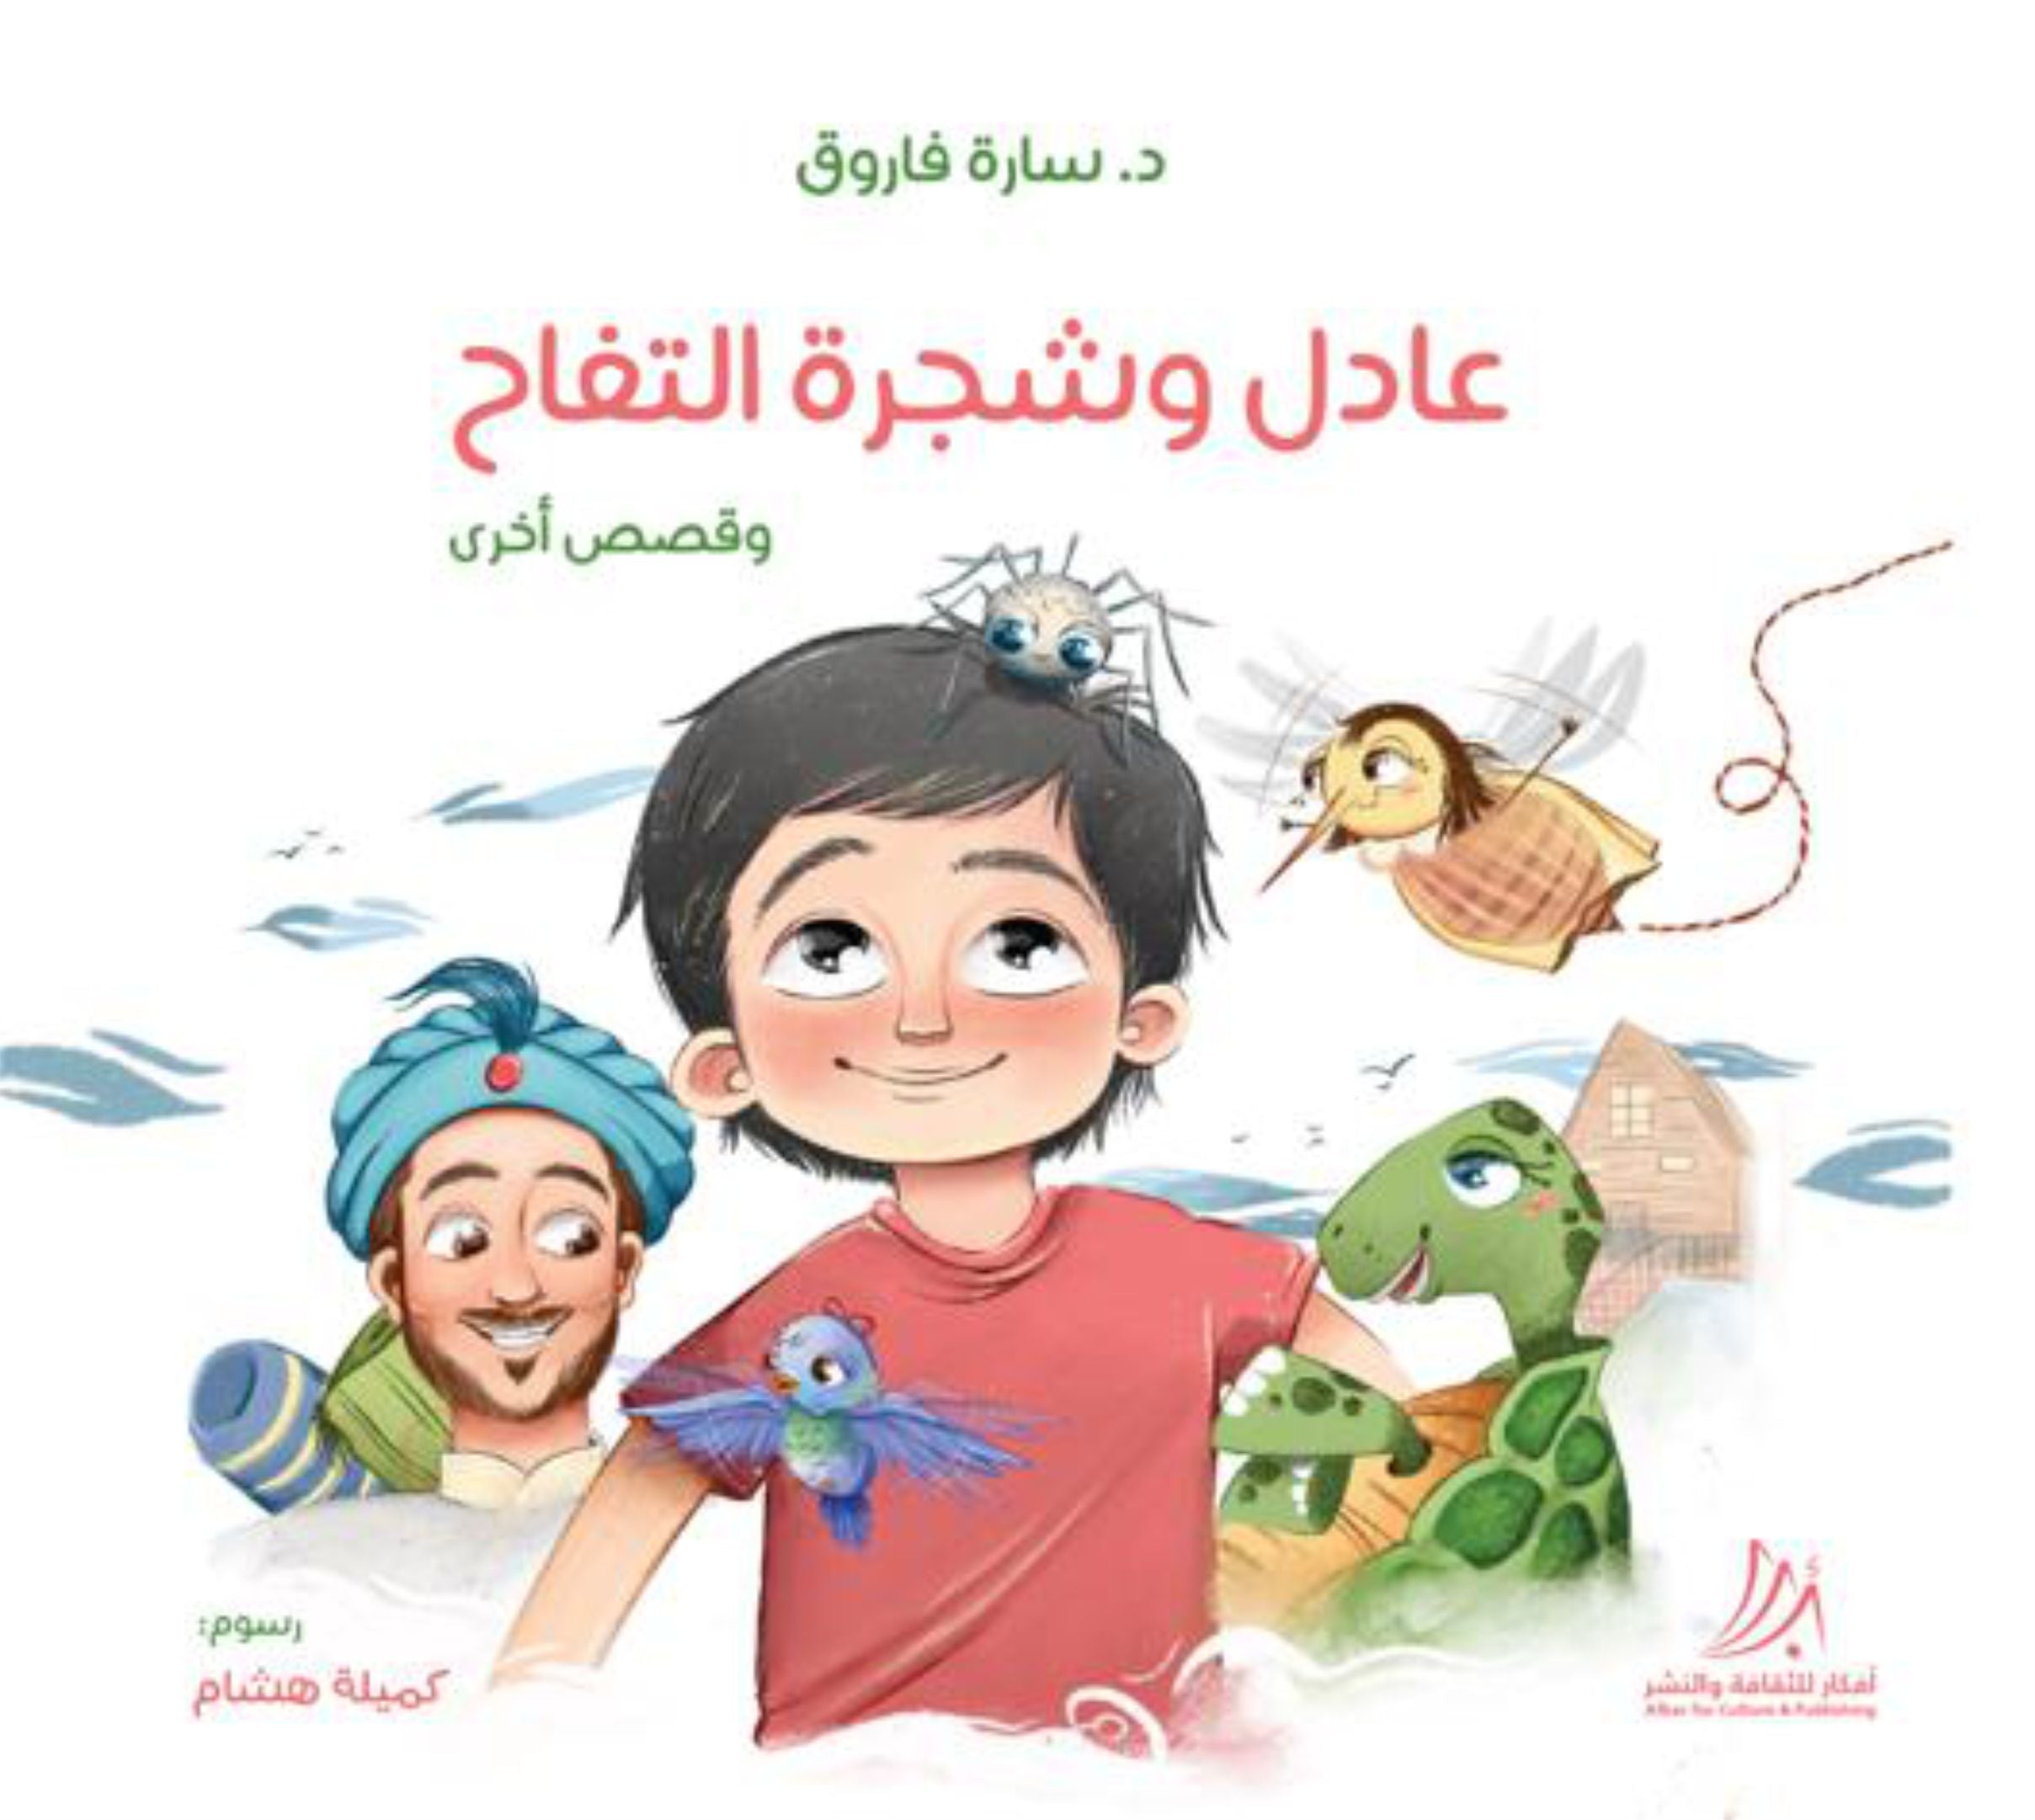 Adel and the Apple tree and other stories (Arabic)